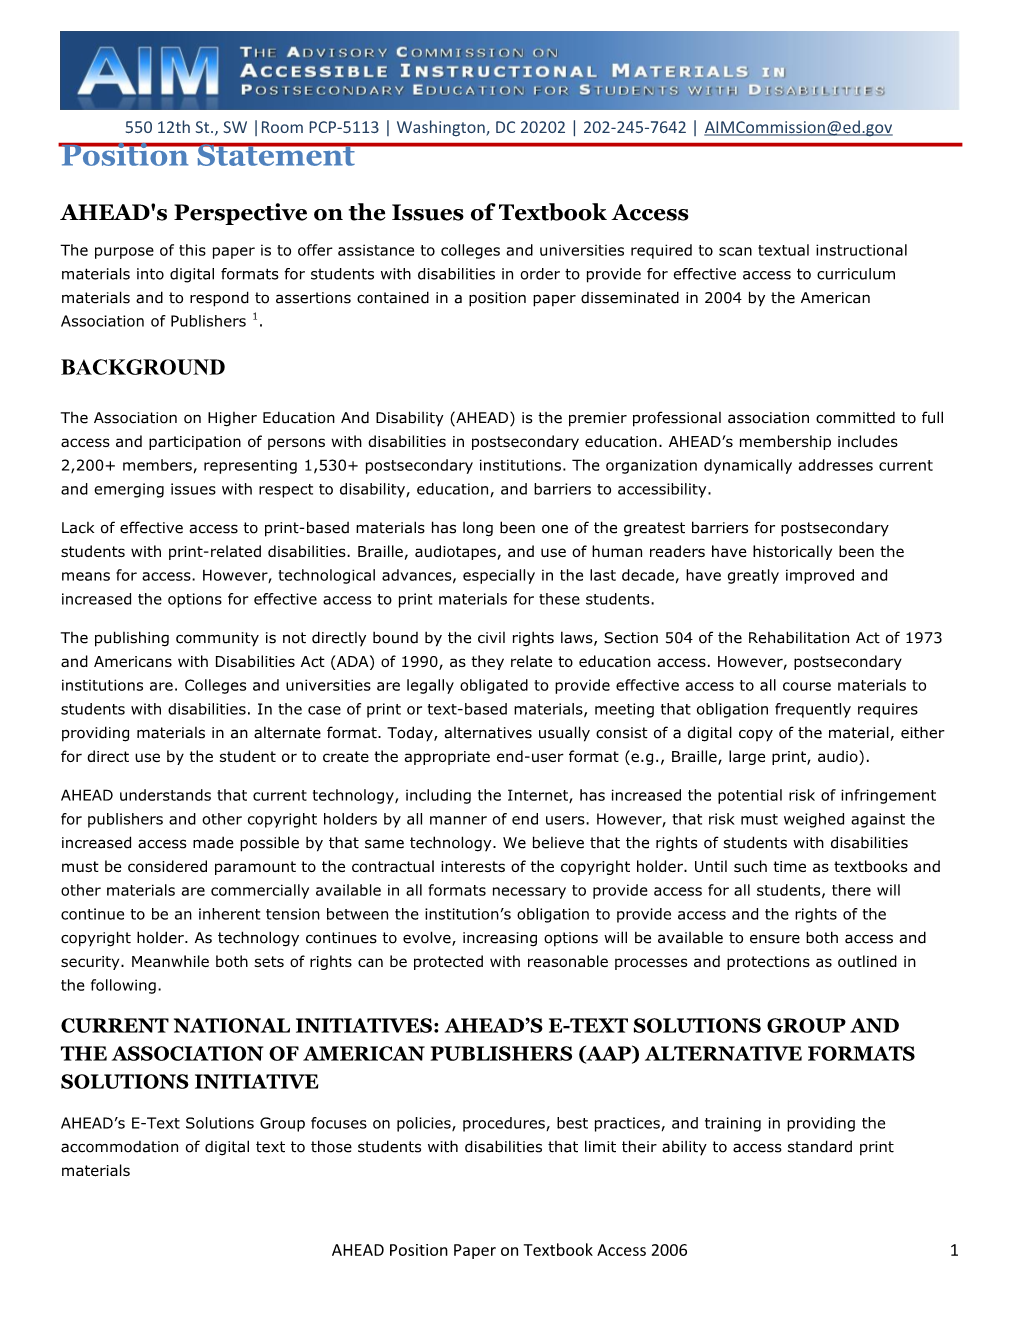 Position Paper: AHEAD's Perspective on the Issues of Textbook Access (MS Word)